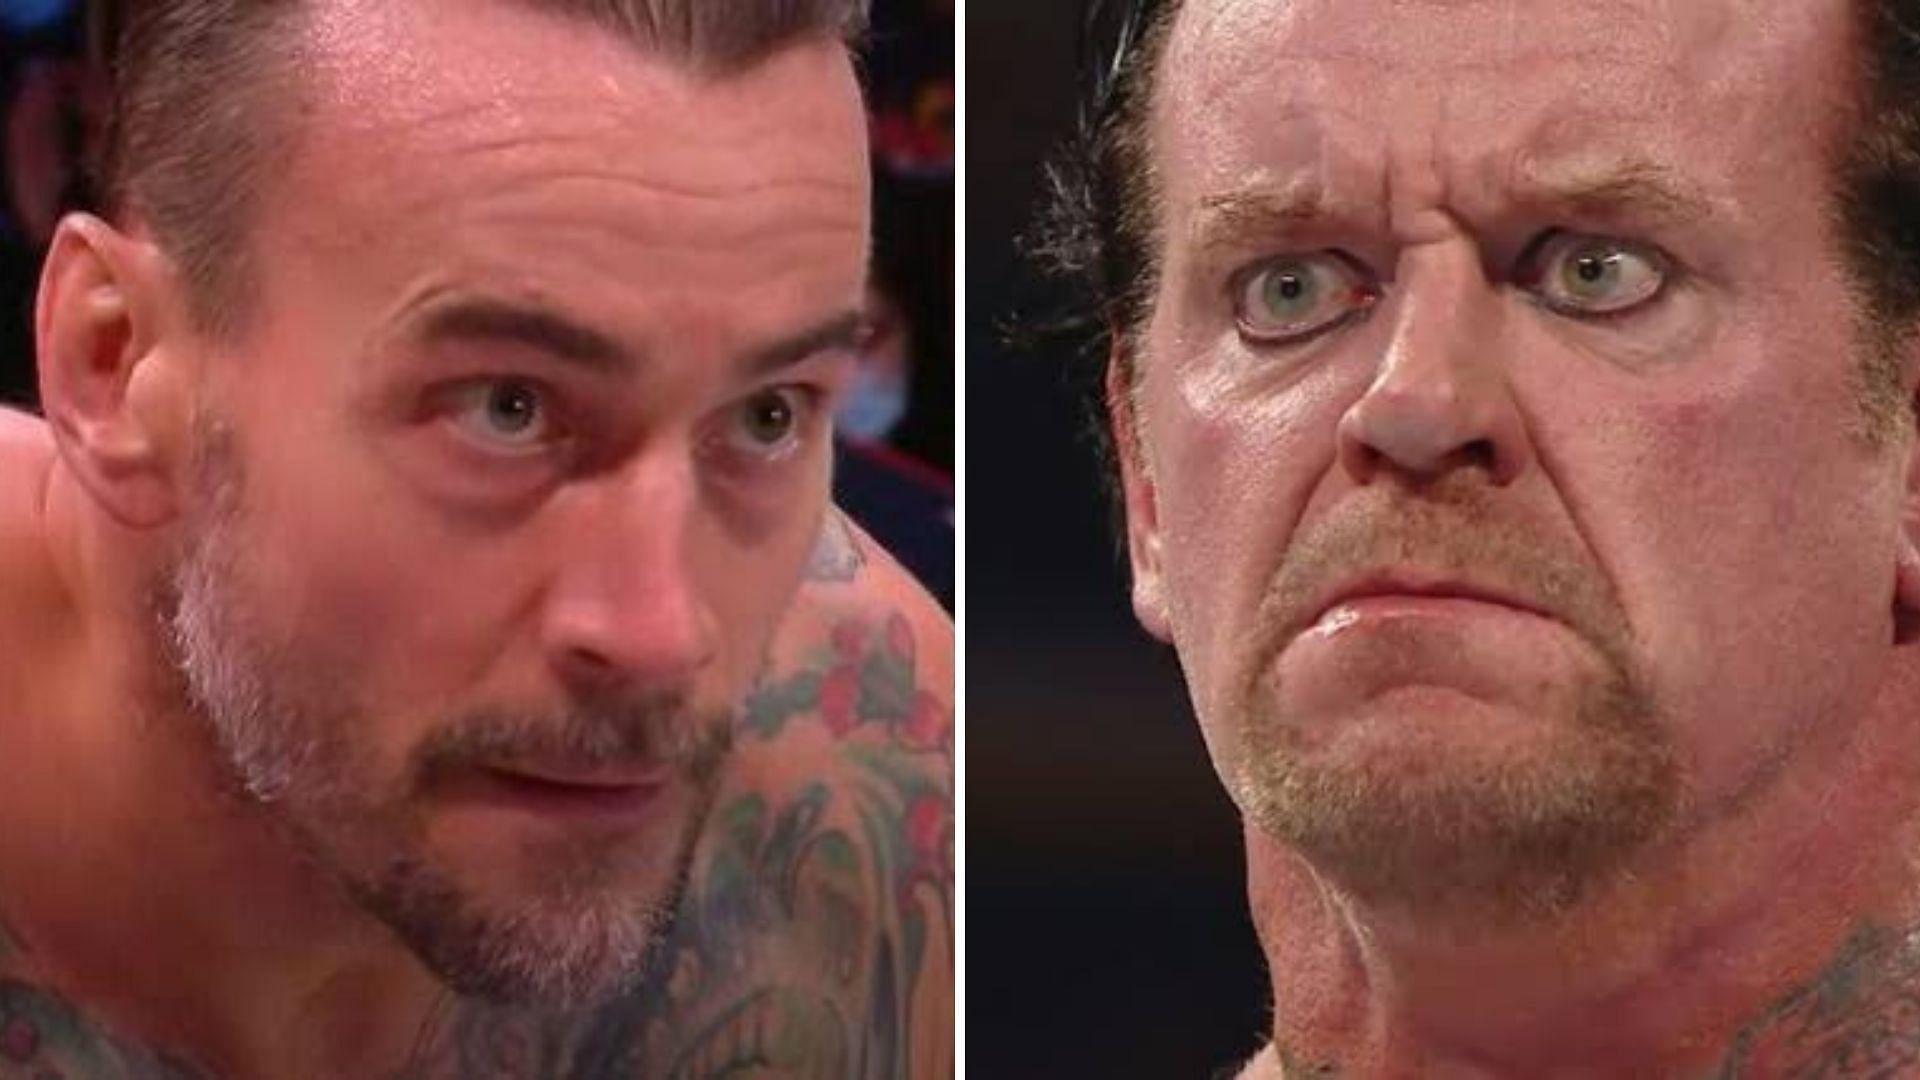 Punk and Undertaker are former on-screen rivals